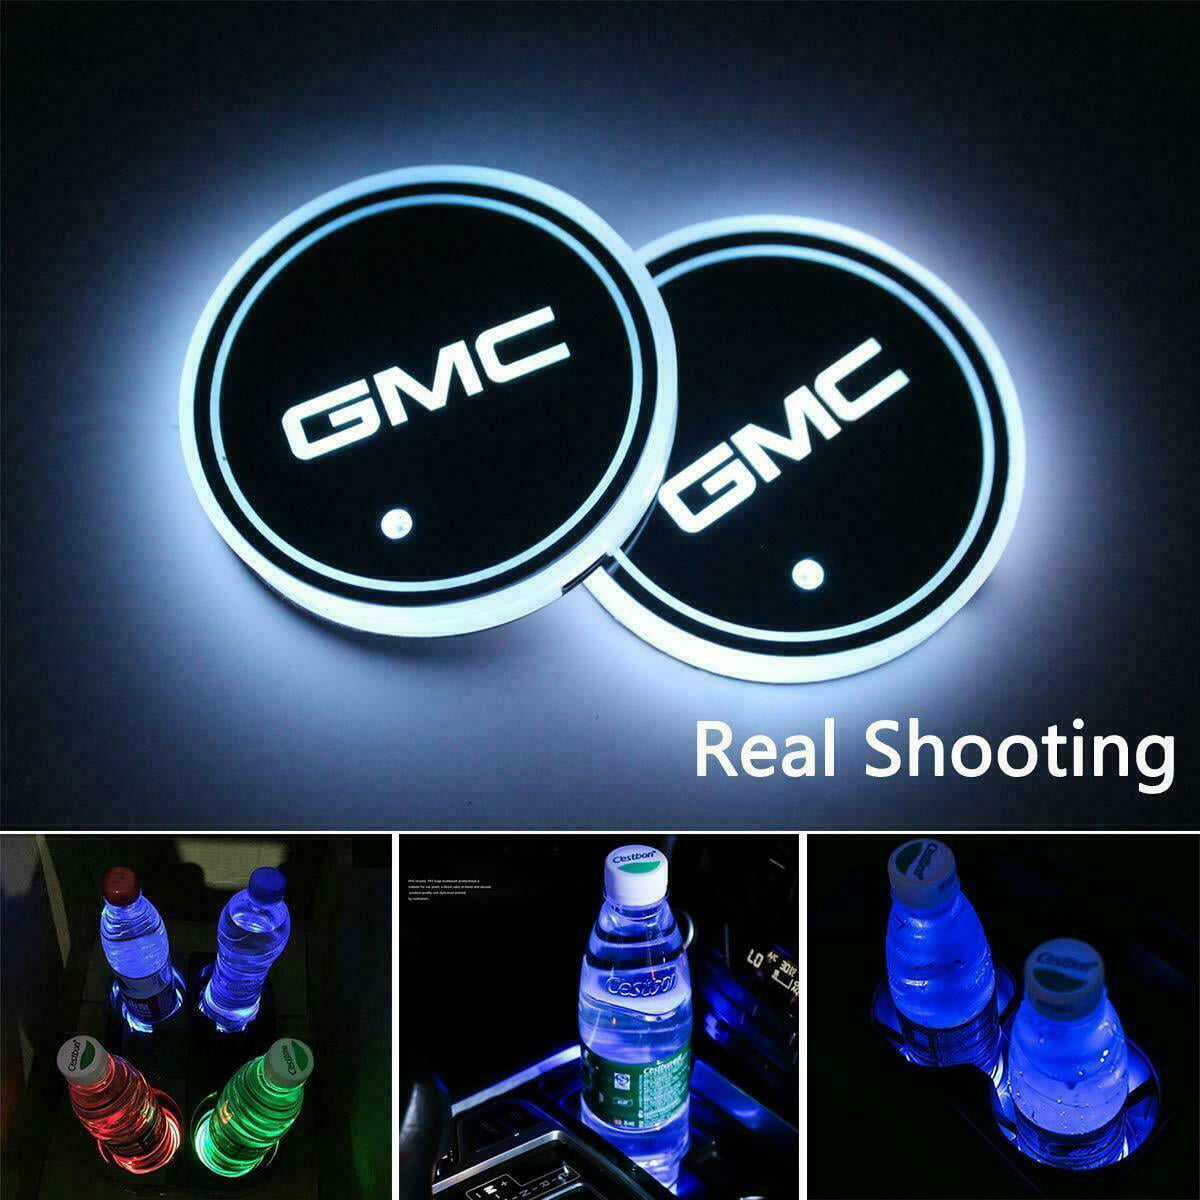 monochef Auto sport 2PCS LED Cup Holder Mat Pad Coaster with USB Rechargeable Interior Decoration Light Acura